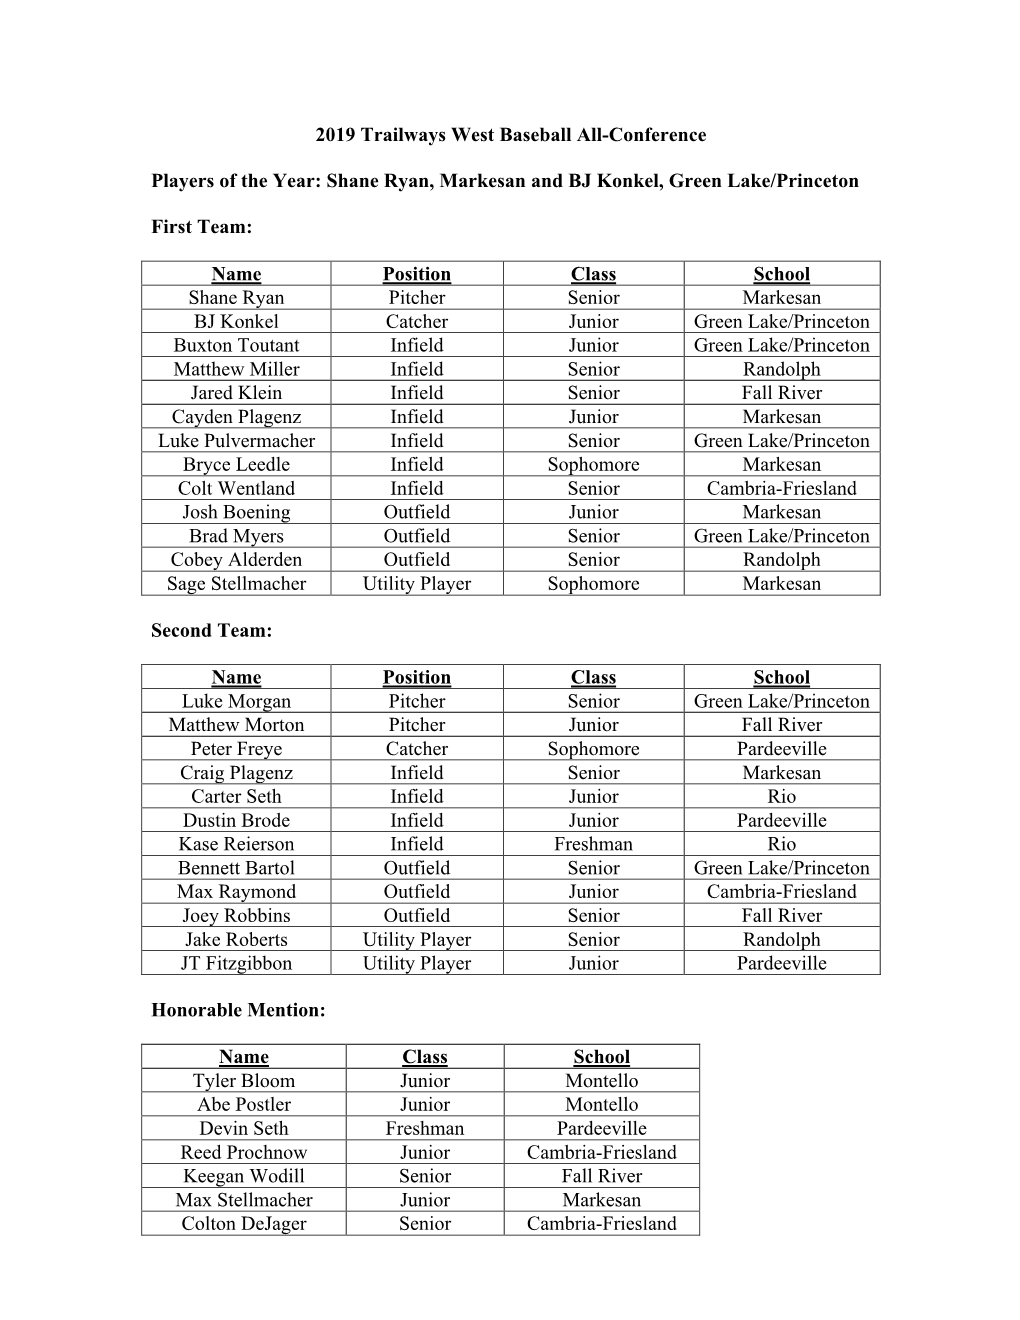 2019 Trailways West Baseball All-Conference Players of the Year